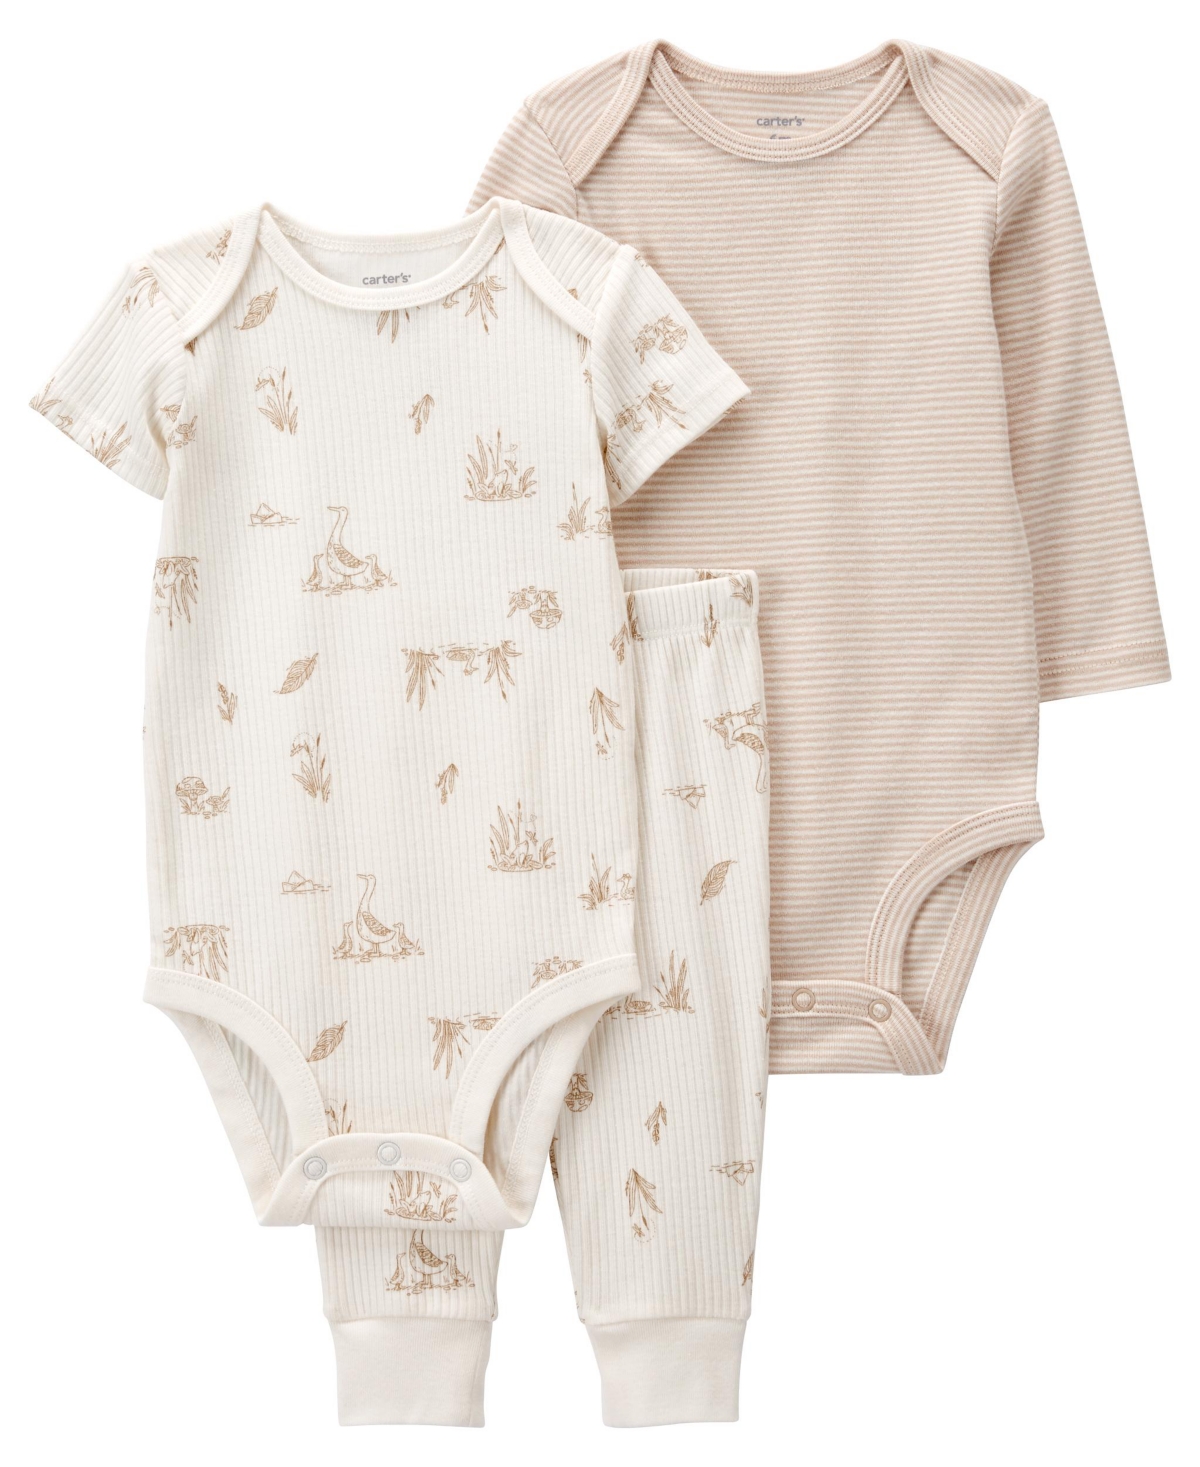 Carter's Baby Boys Or Baby Girls Bodysuits And Joggers, 3 Piece Set In White